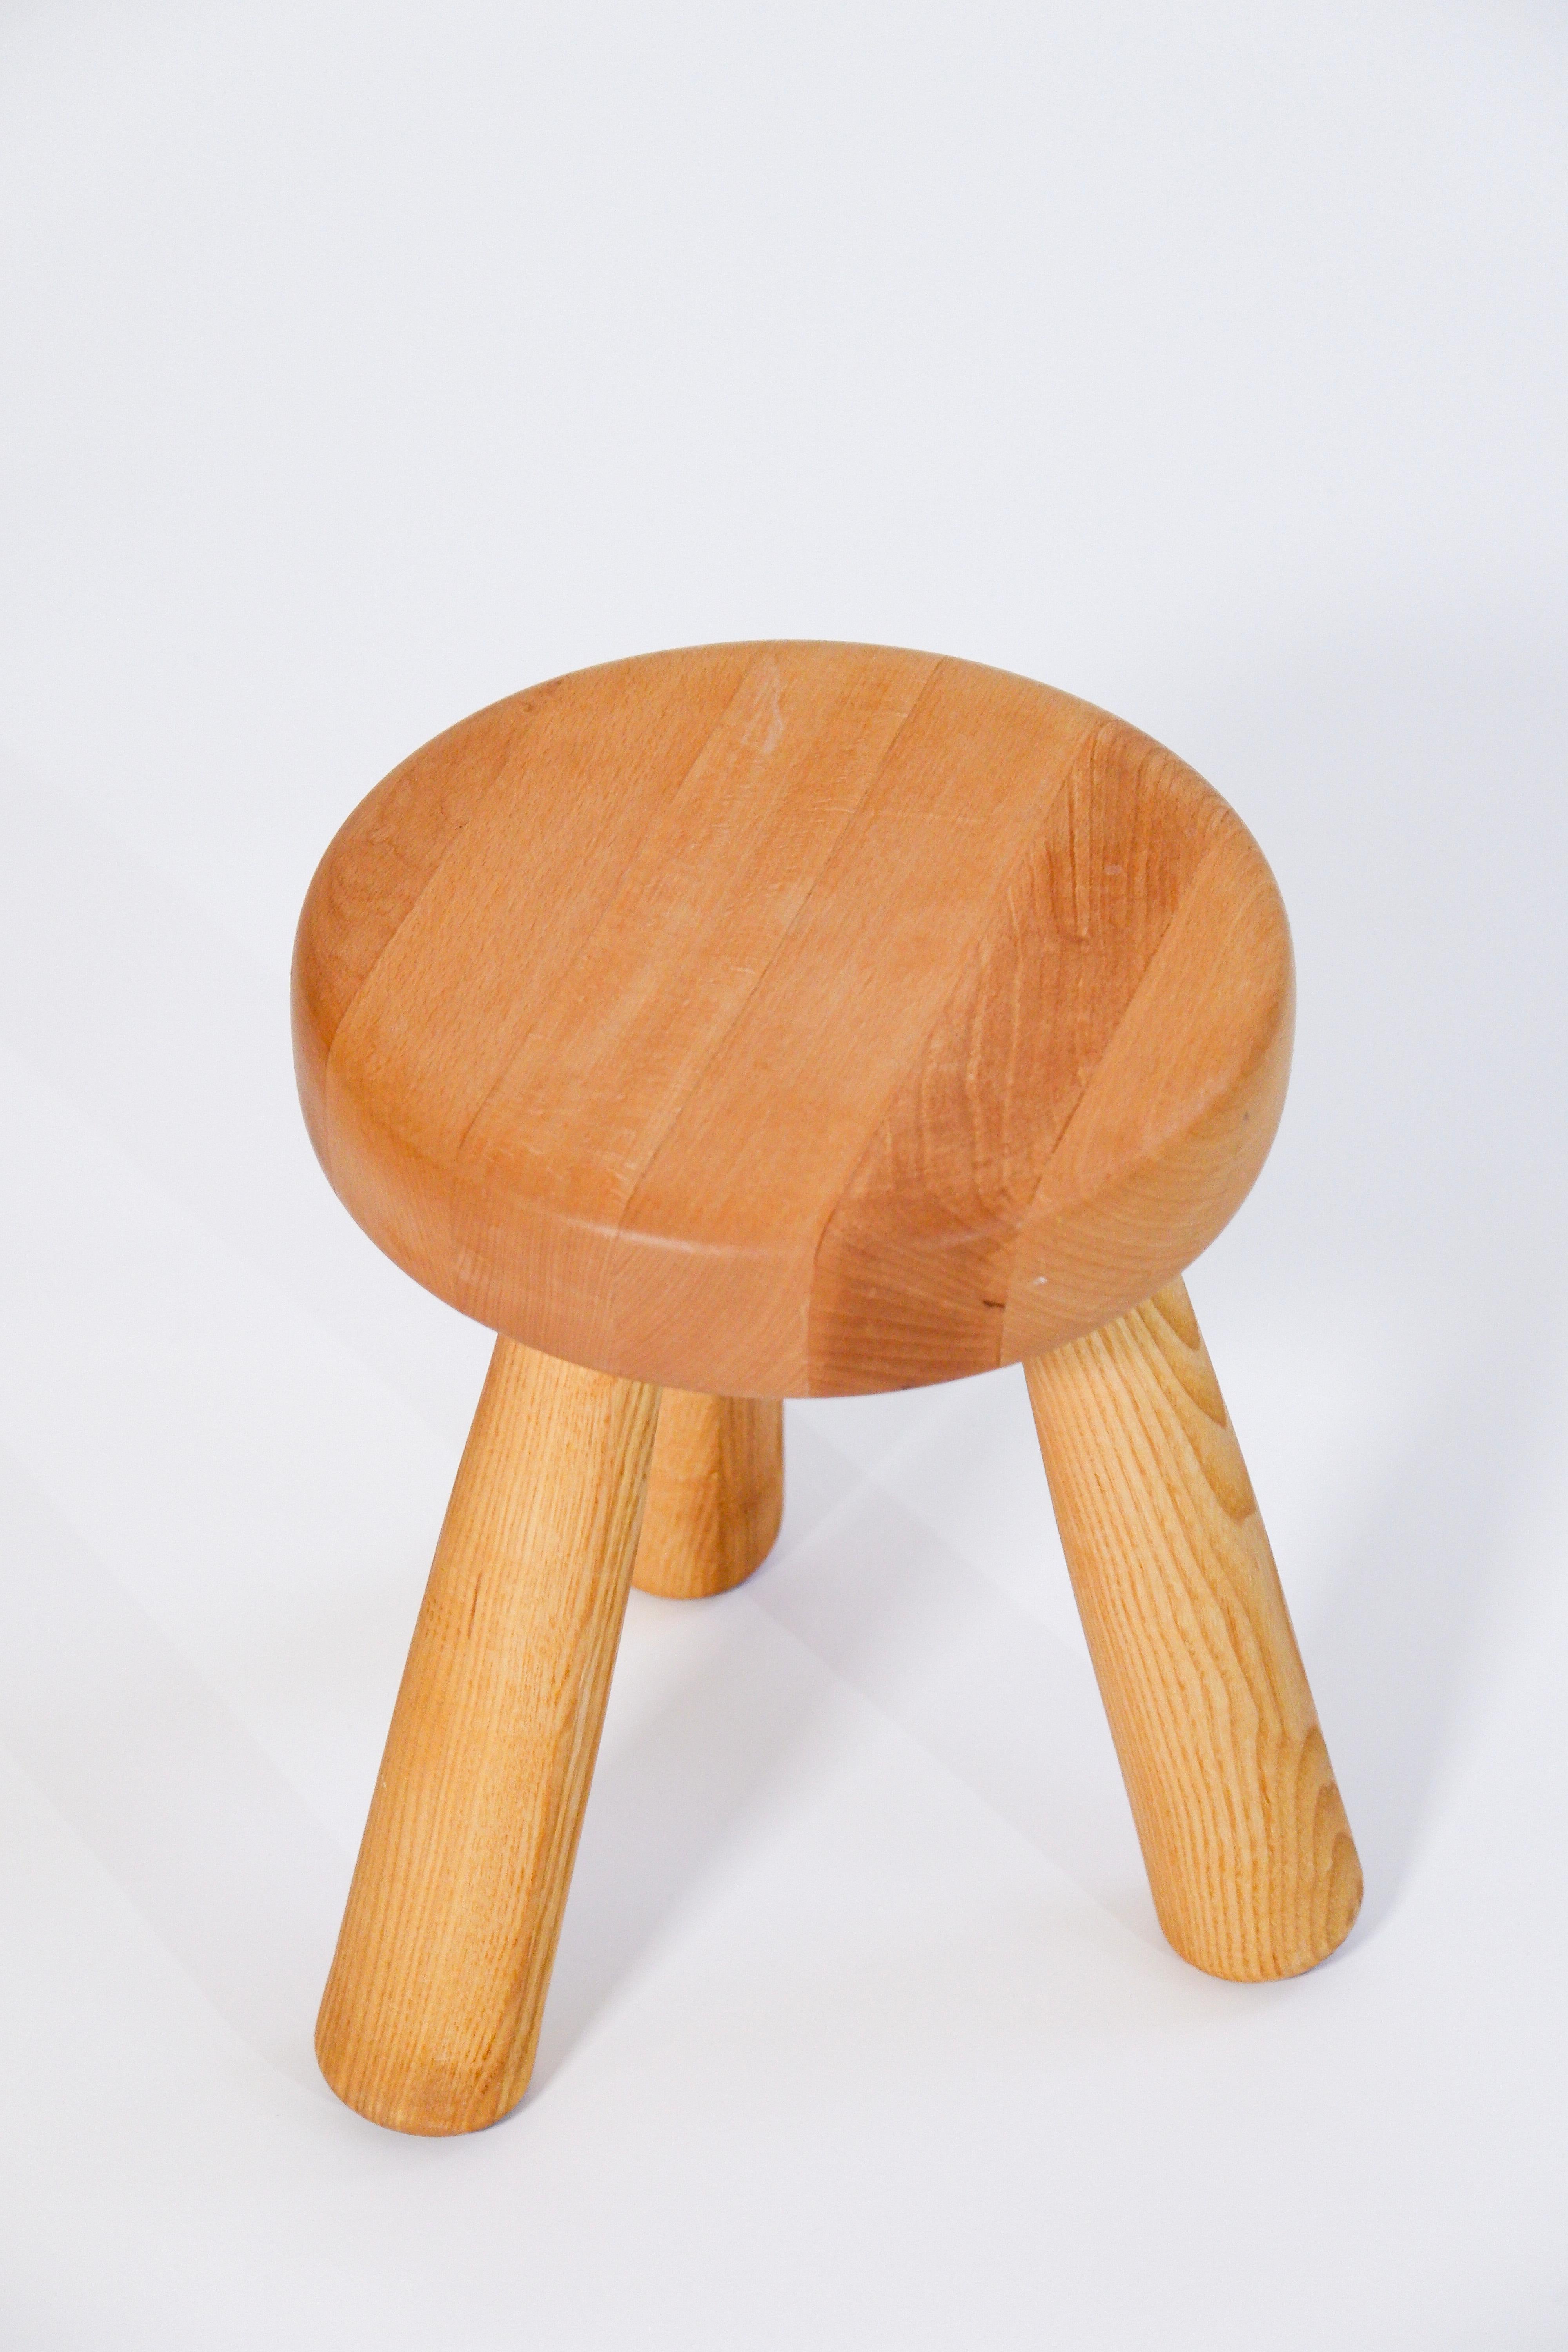 Rare mix wood Ingvar Hildingsson stool made in Beech & ash wood during the last part of the XXème century. The stool is in verry good condition, it's mark and labeled by the artist. Ingvar Hildingsson stool are based on rural and folk swedish art